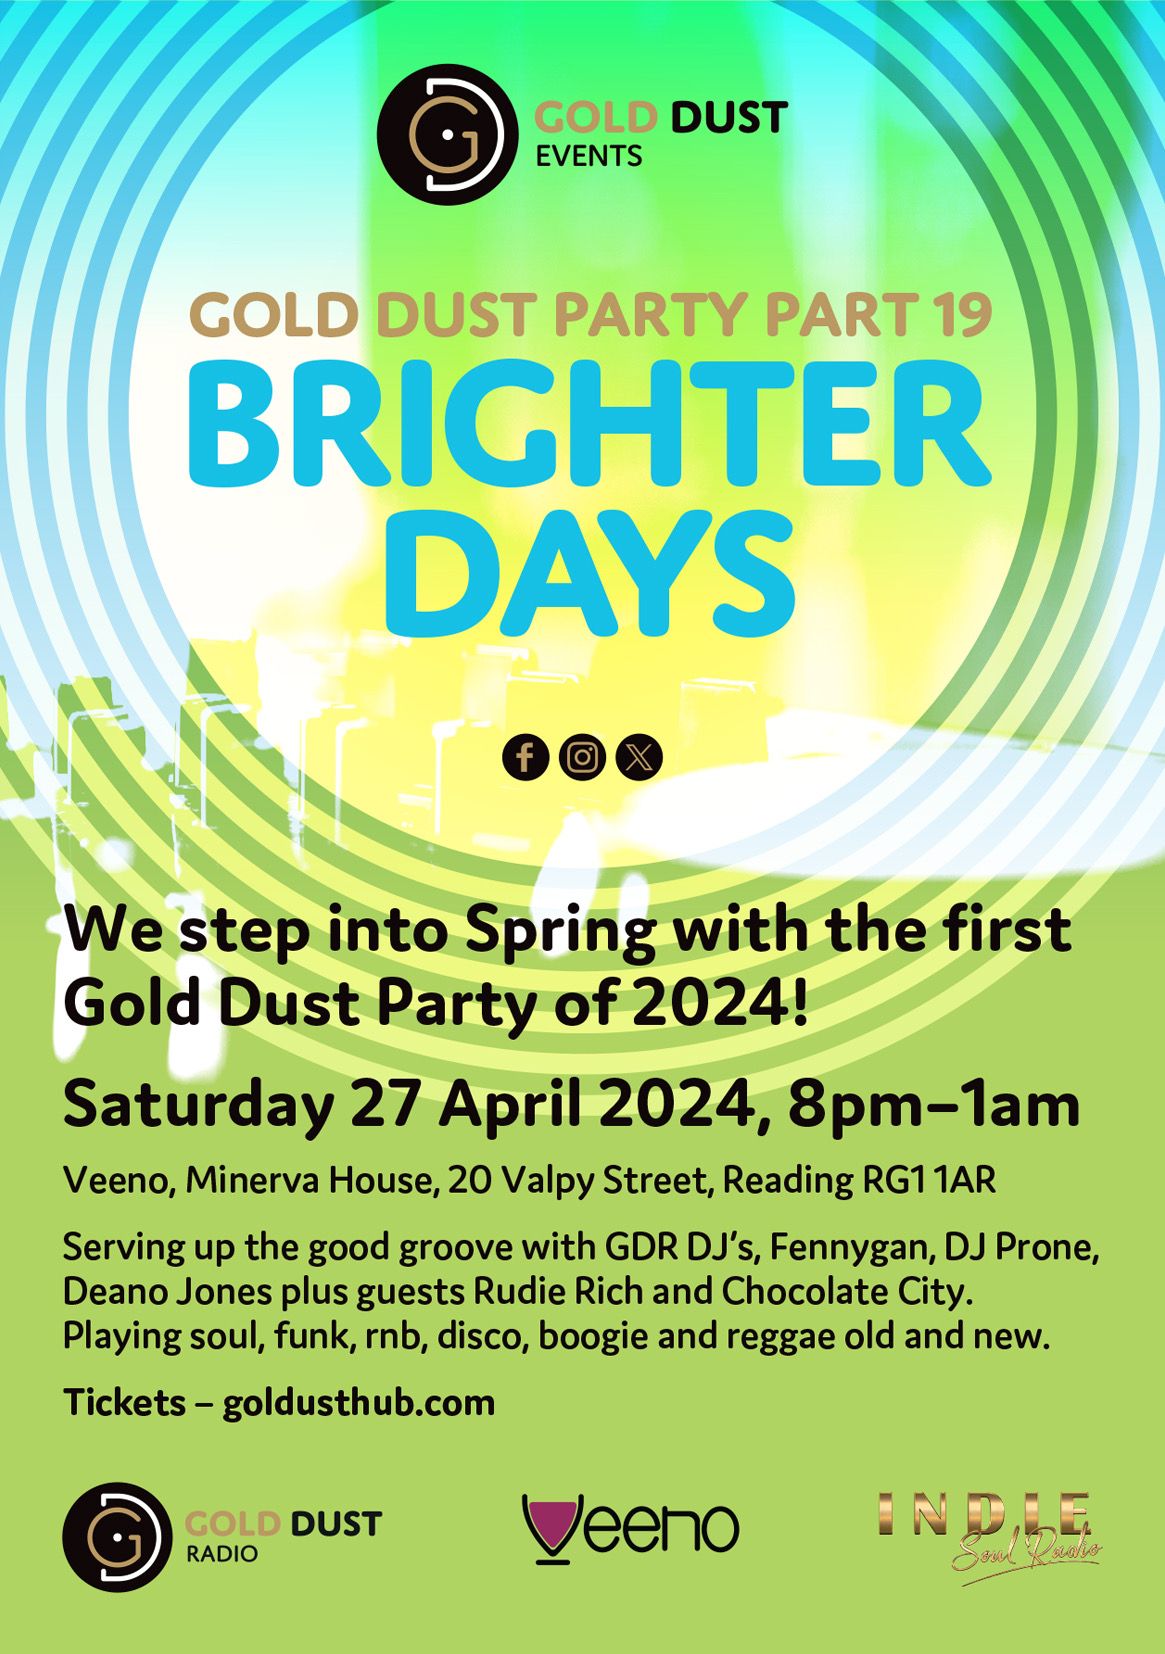 GOLD DUST PARTY PART 19 - BRIGHTER DAYS